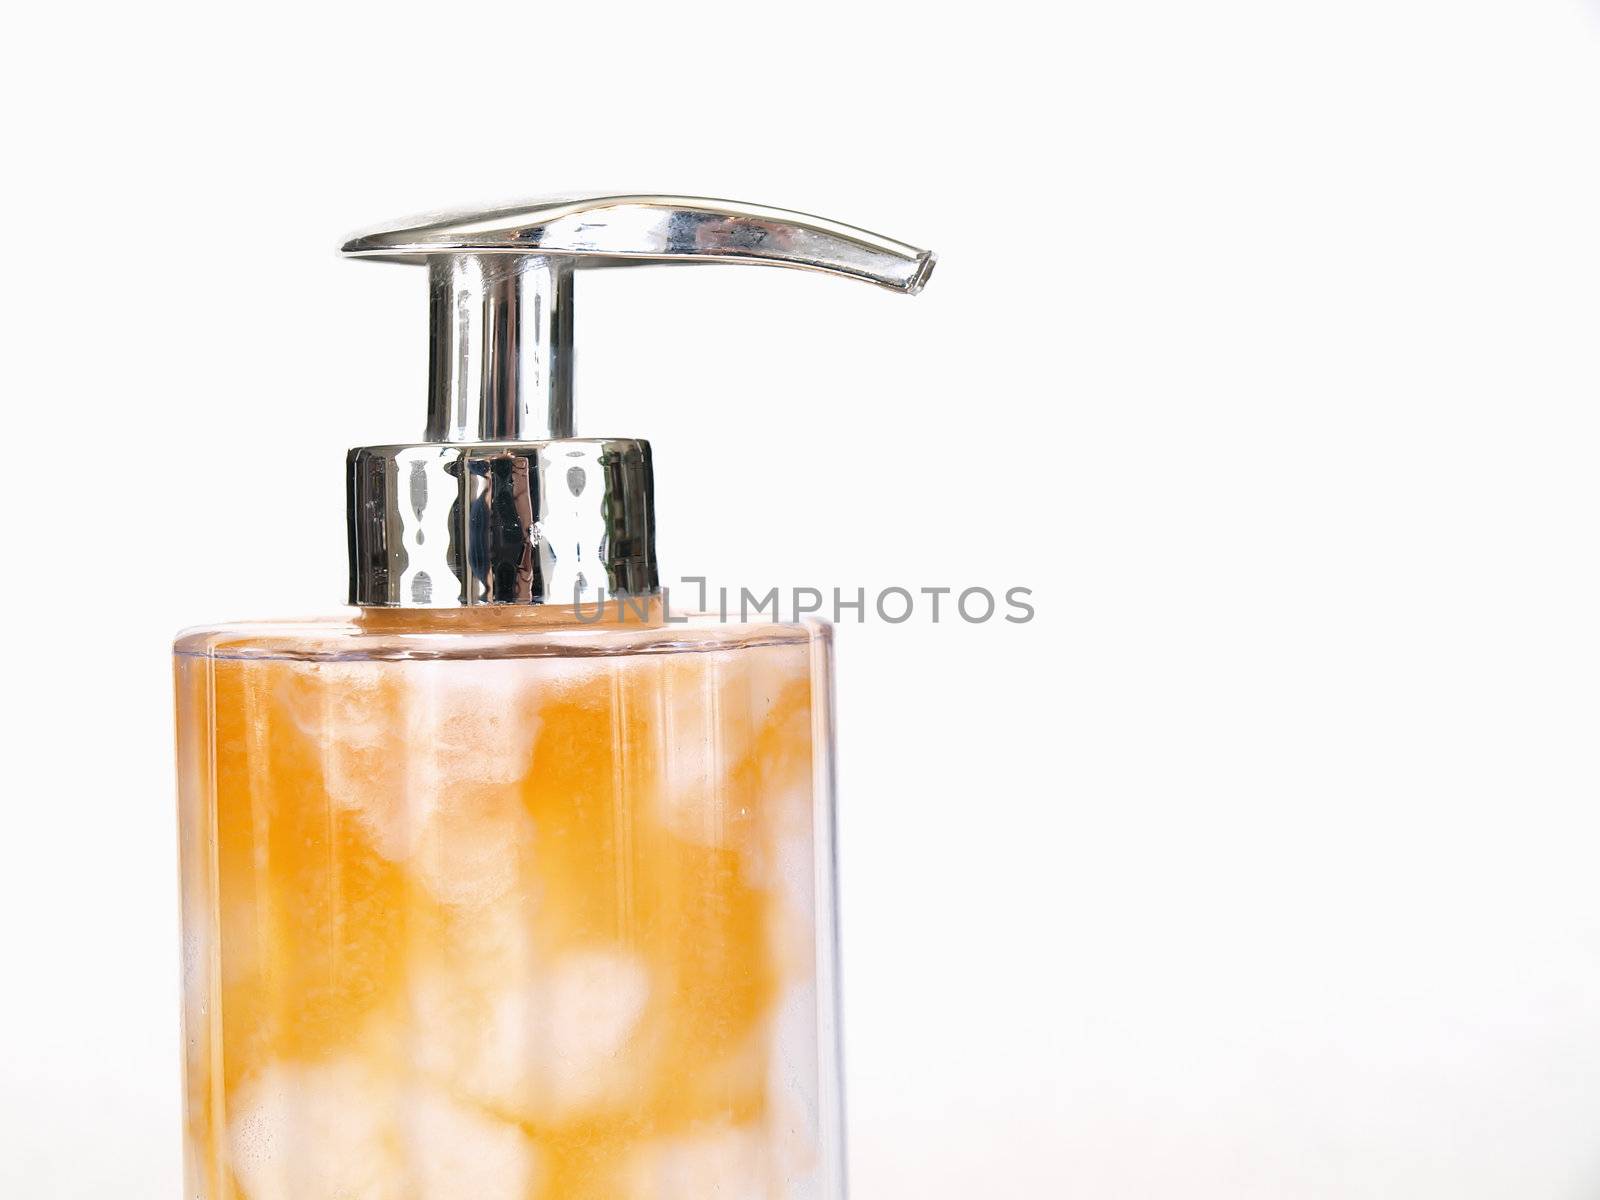 A soap pump with orange and white soap mixed inside. Over a white background.